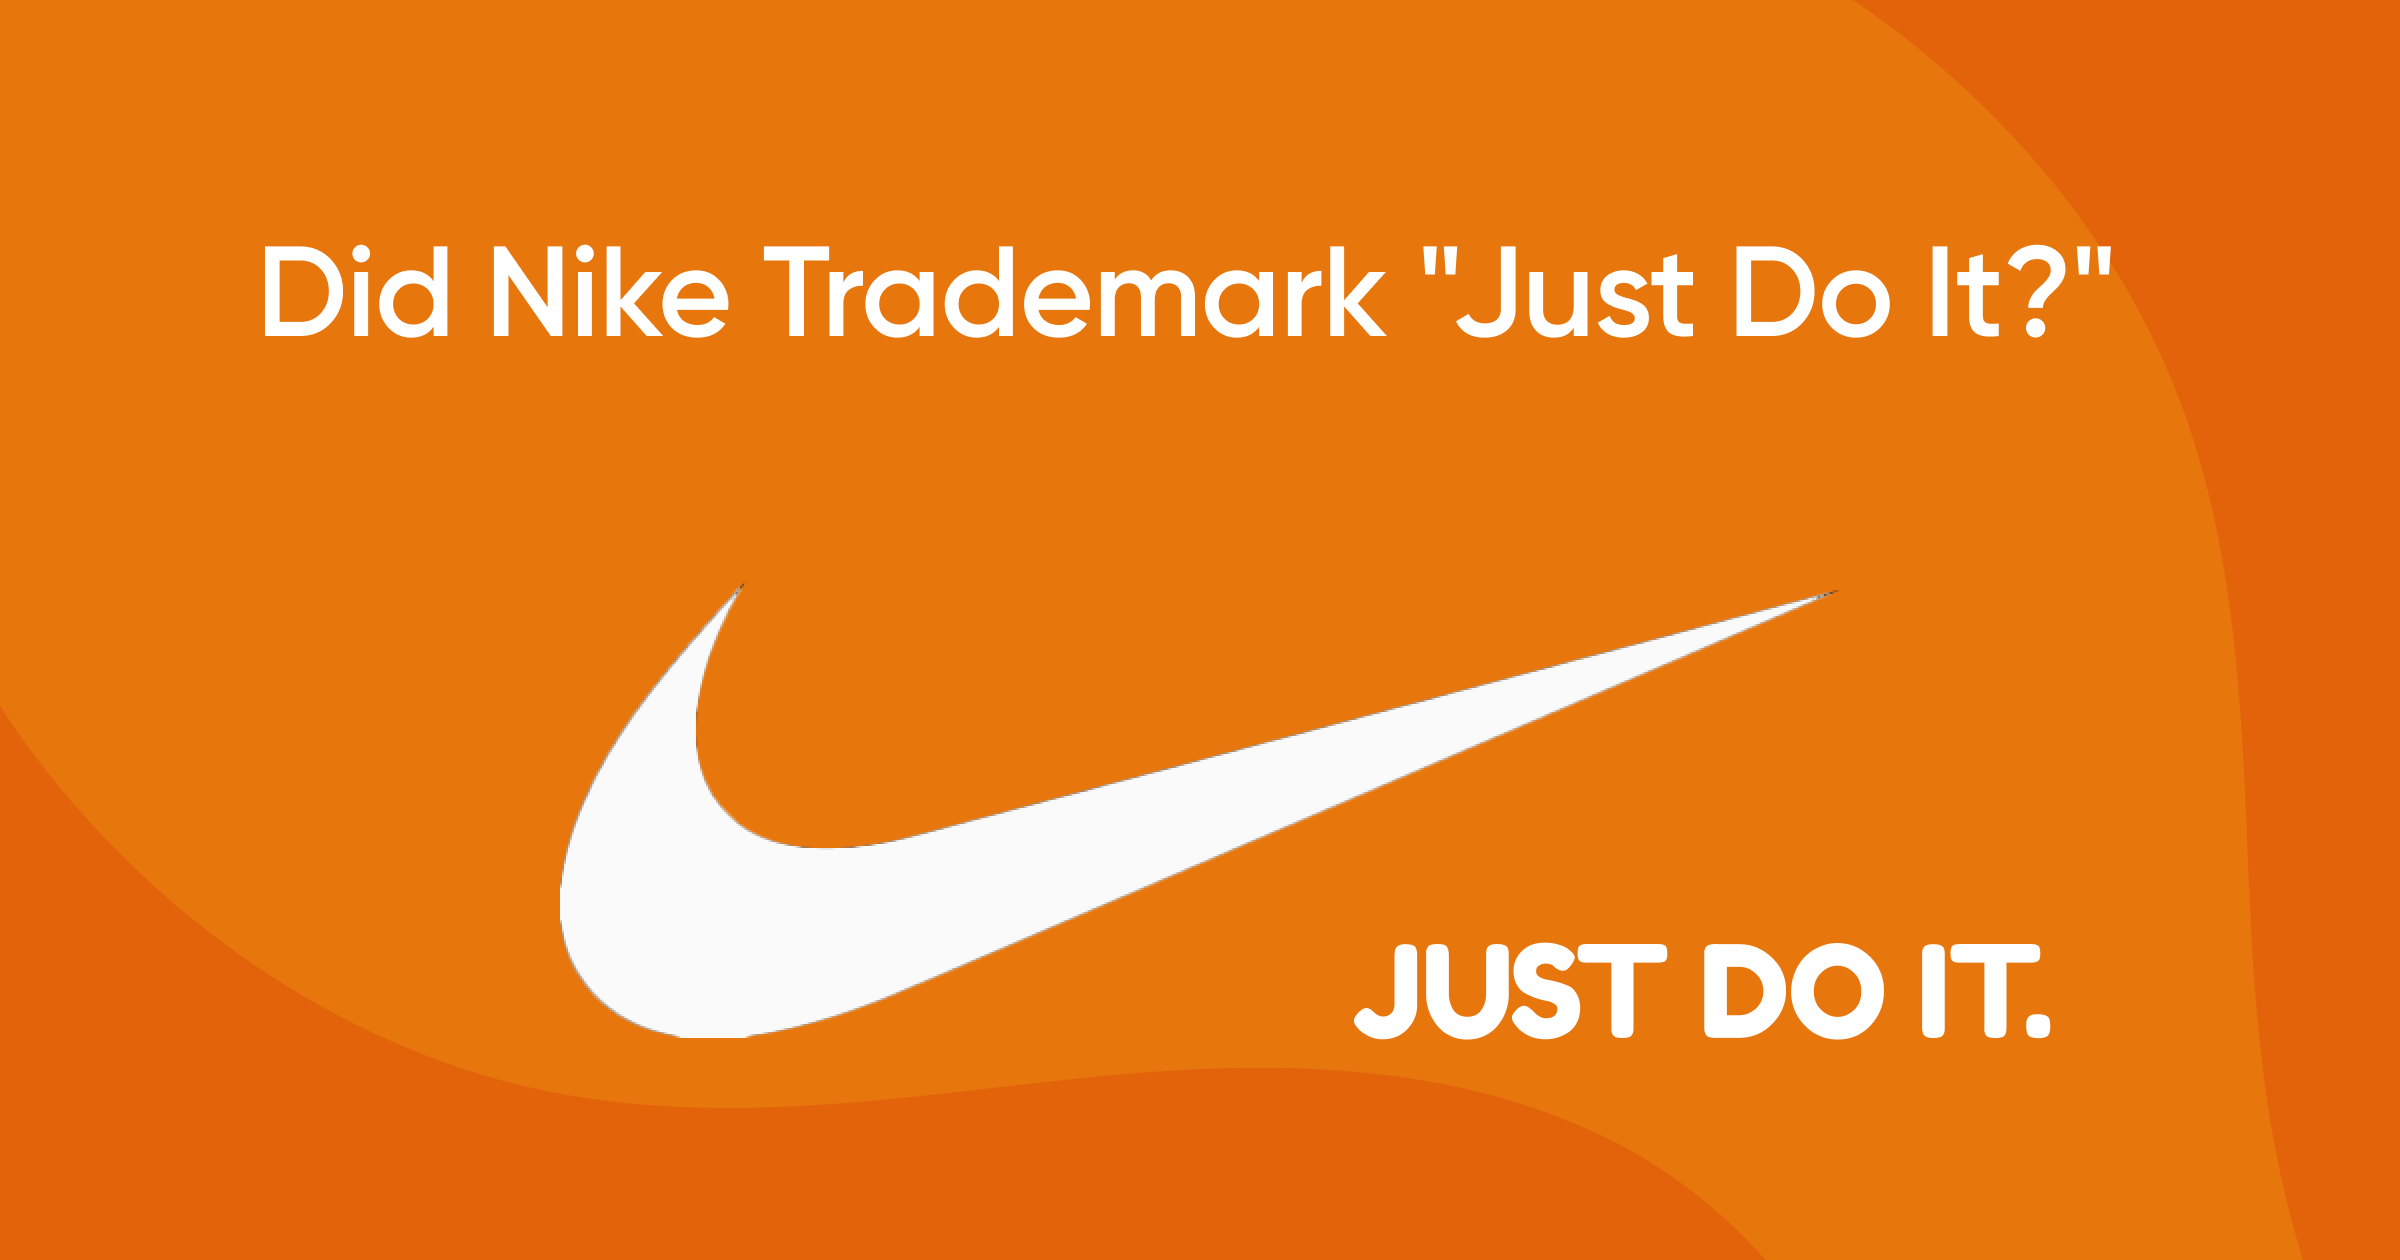 Did Nike Trademark “Just Do It?” Let's Explore.